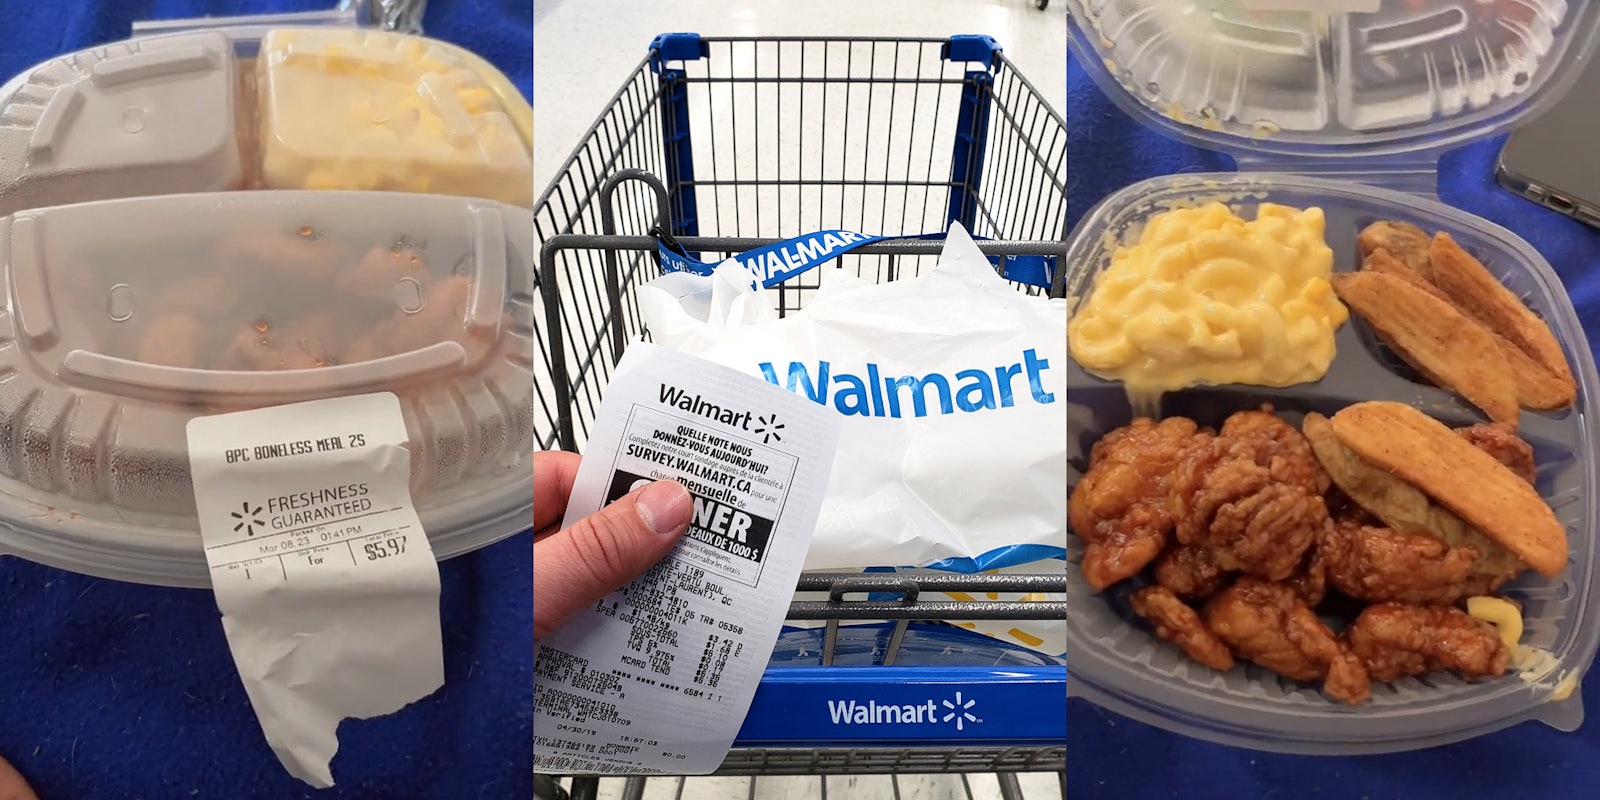 Walmart $5.97 hot meal in container (l) hand holding Walmart receipt with cart (c) Walmart hot food in container with lid up (r)